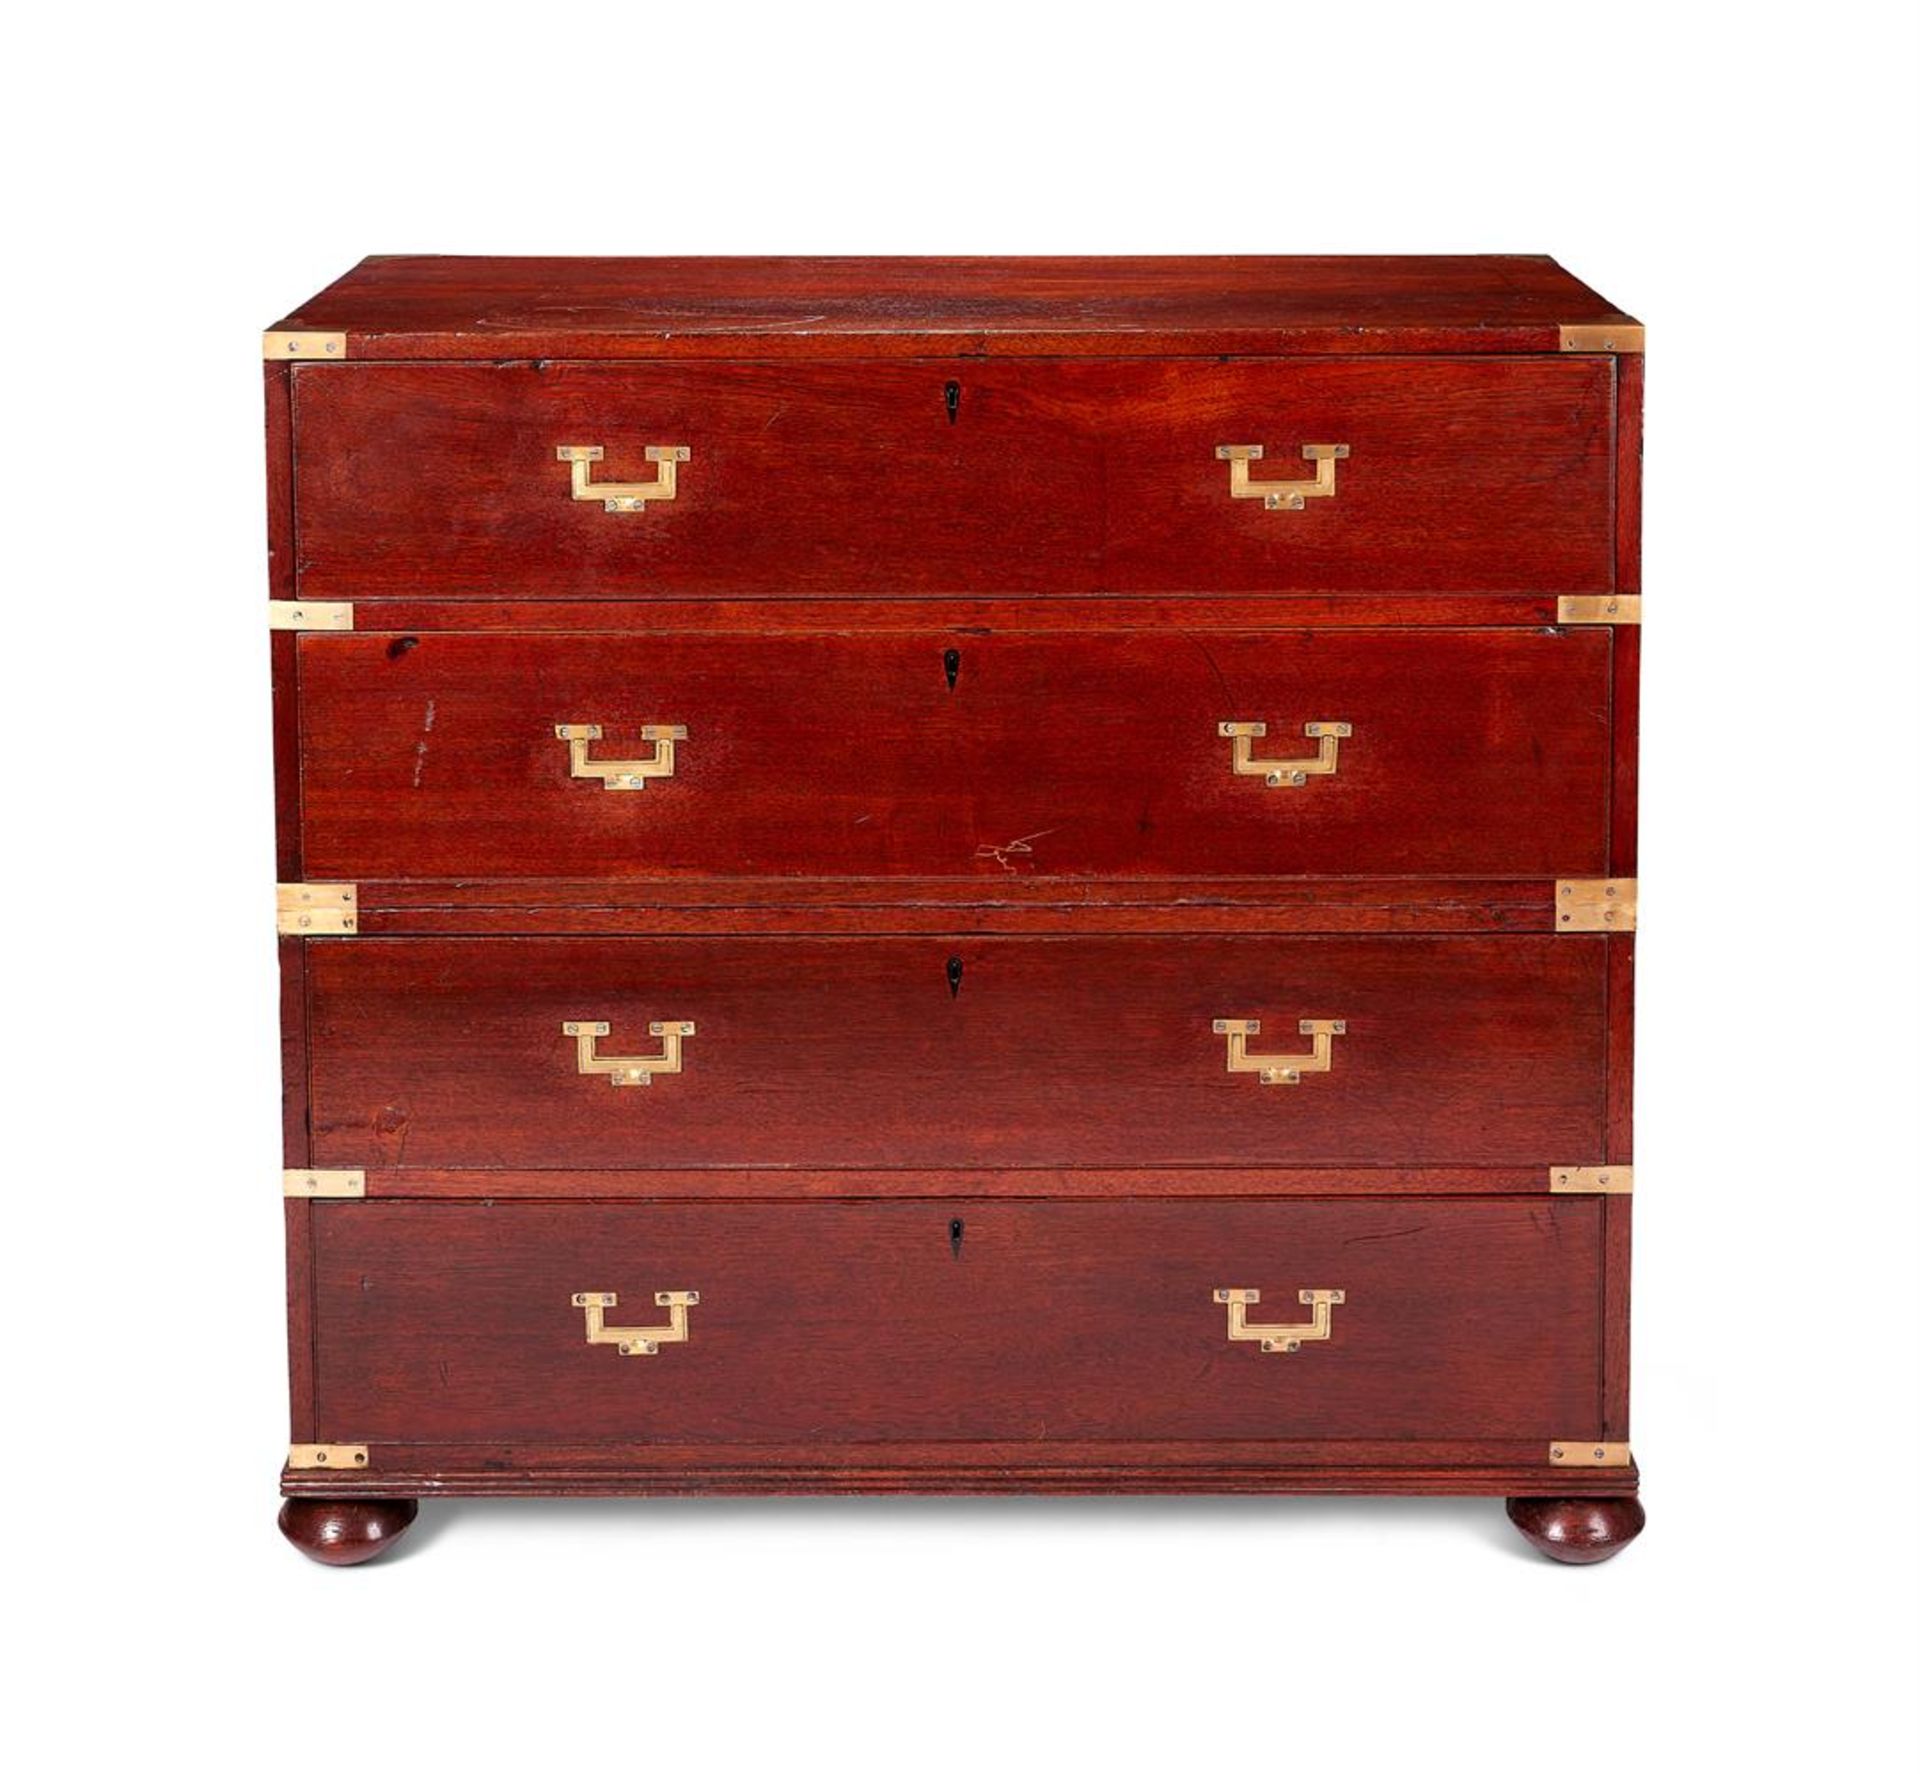 AN EARLY VICTORIAN TEAK AND BRASS MOUNTED CAMPAIGN CHEST OF DRAWERS, MID 19TH CENTURY - Bild 2 aus 2